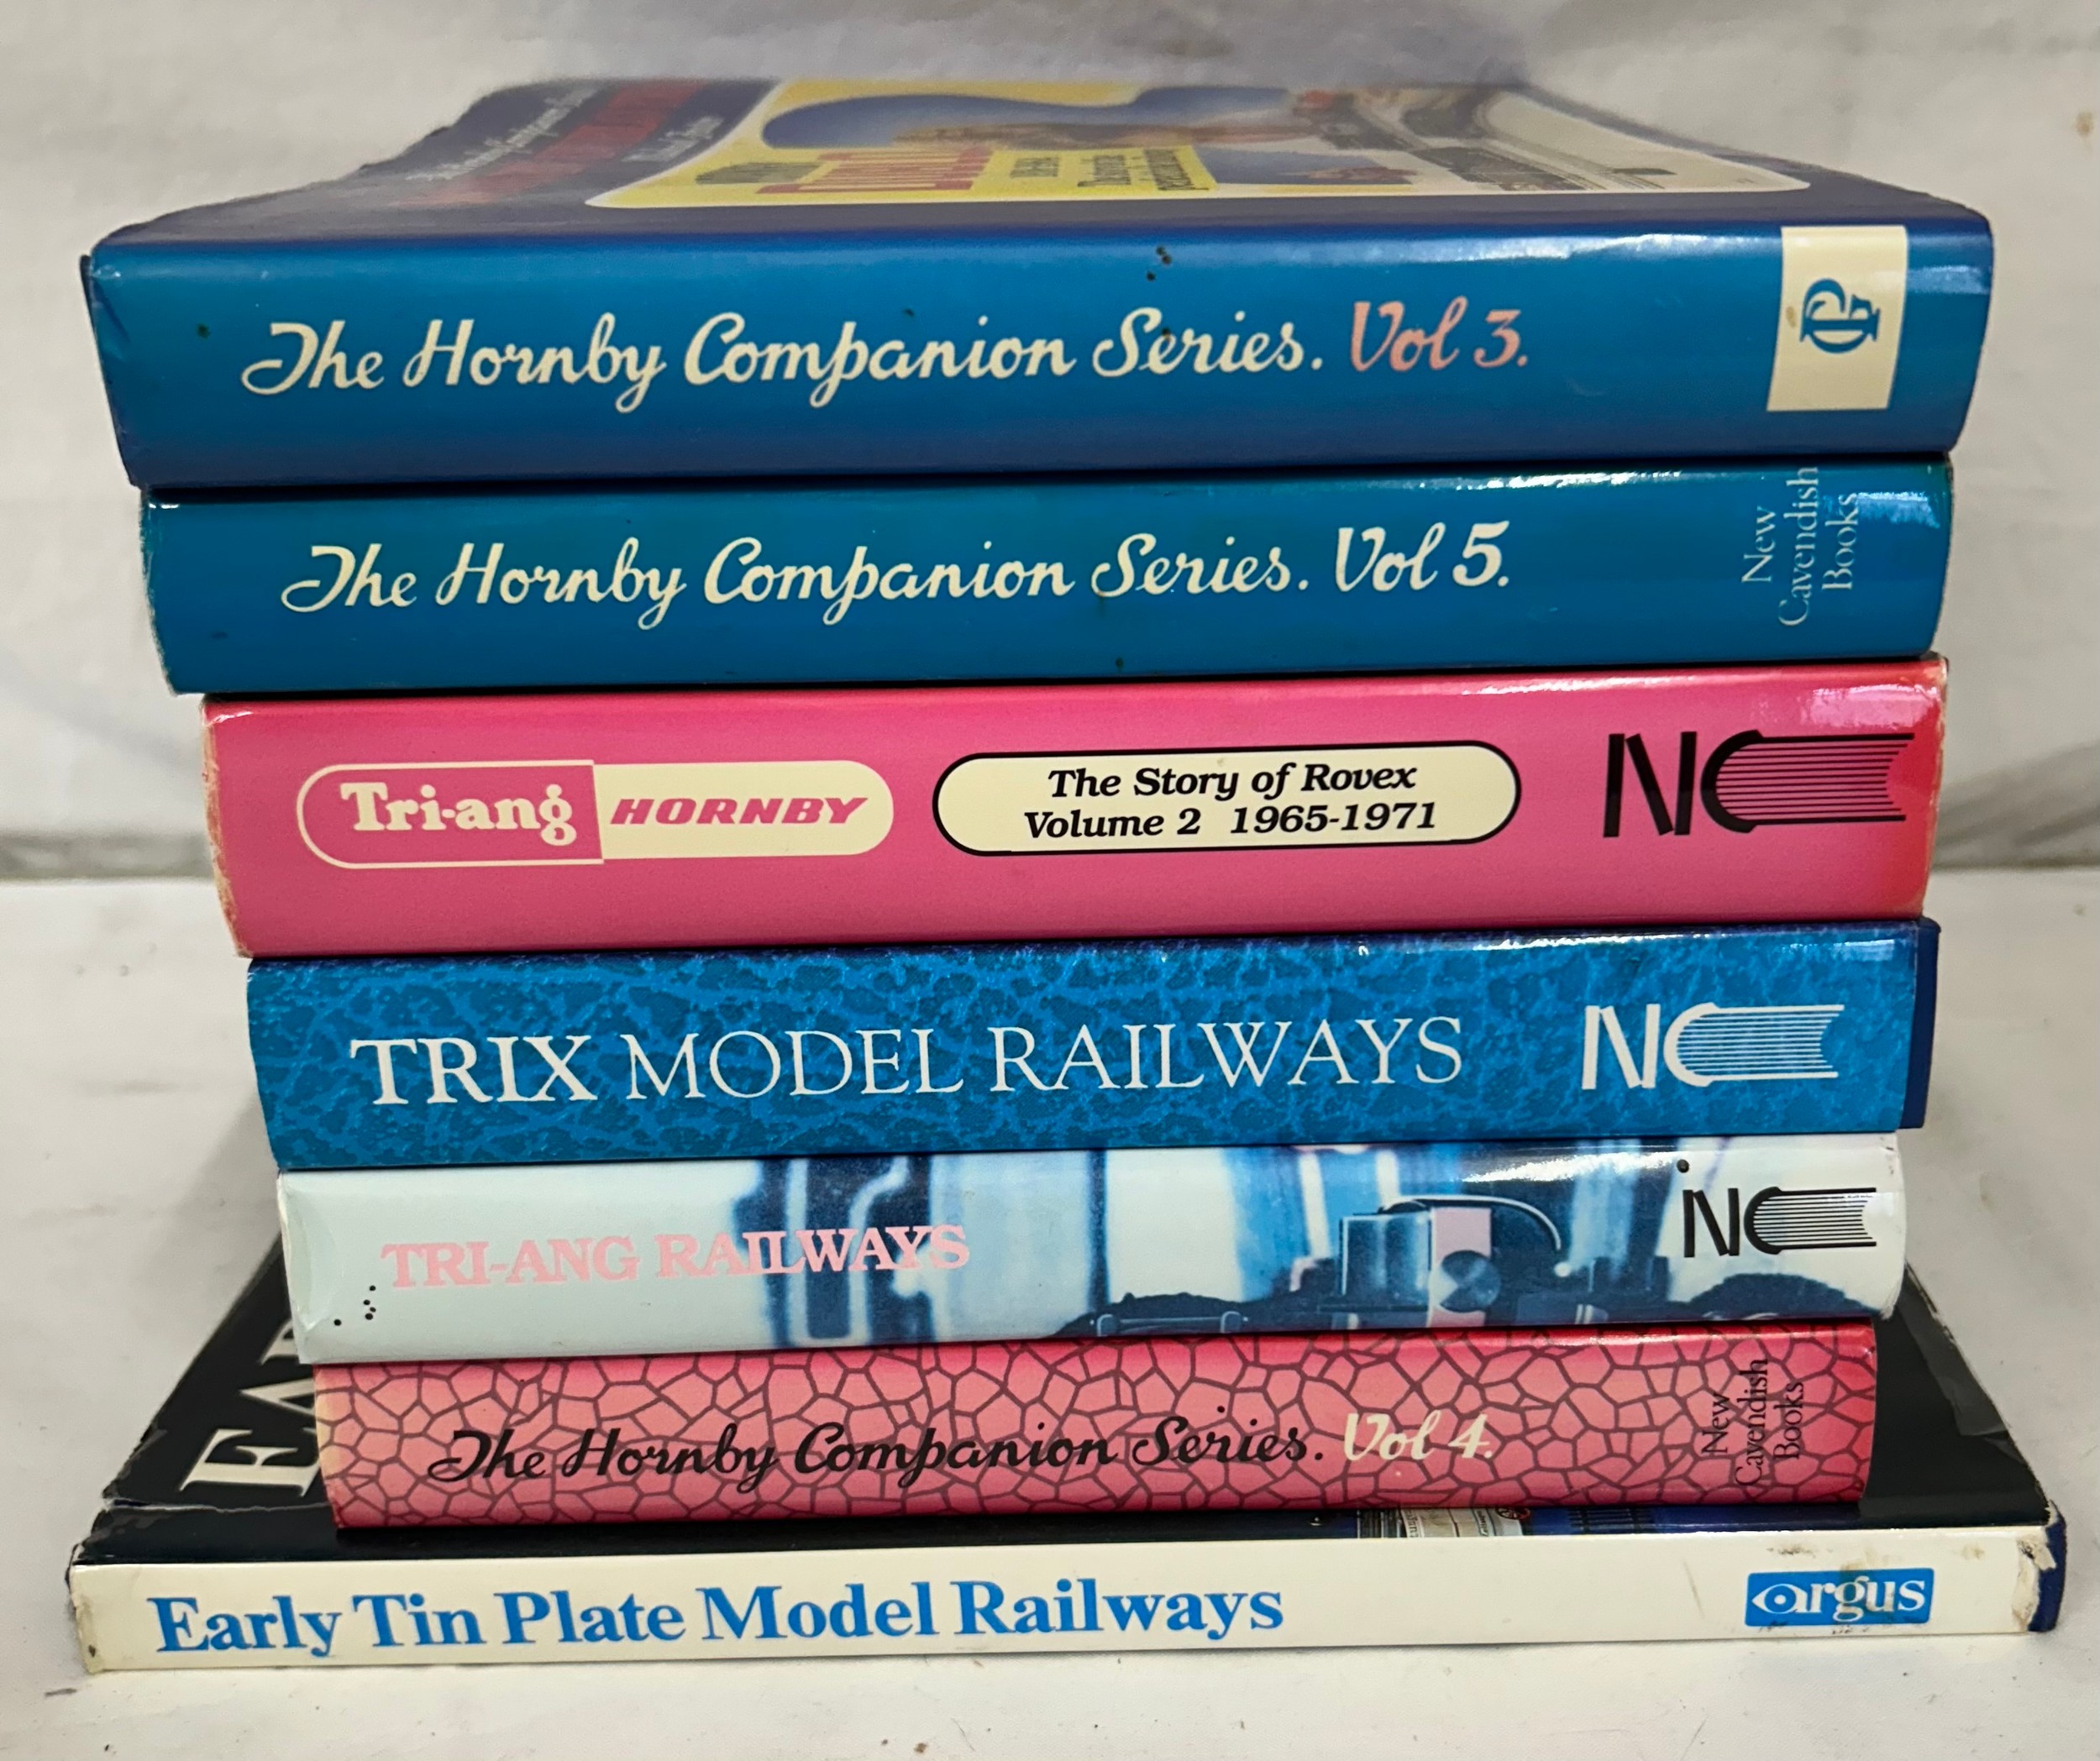 Hardback reference books to include The History of Trix HO/OO Model Railways in Britain, Tony